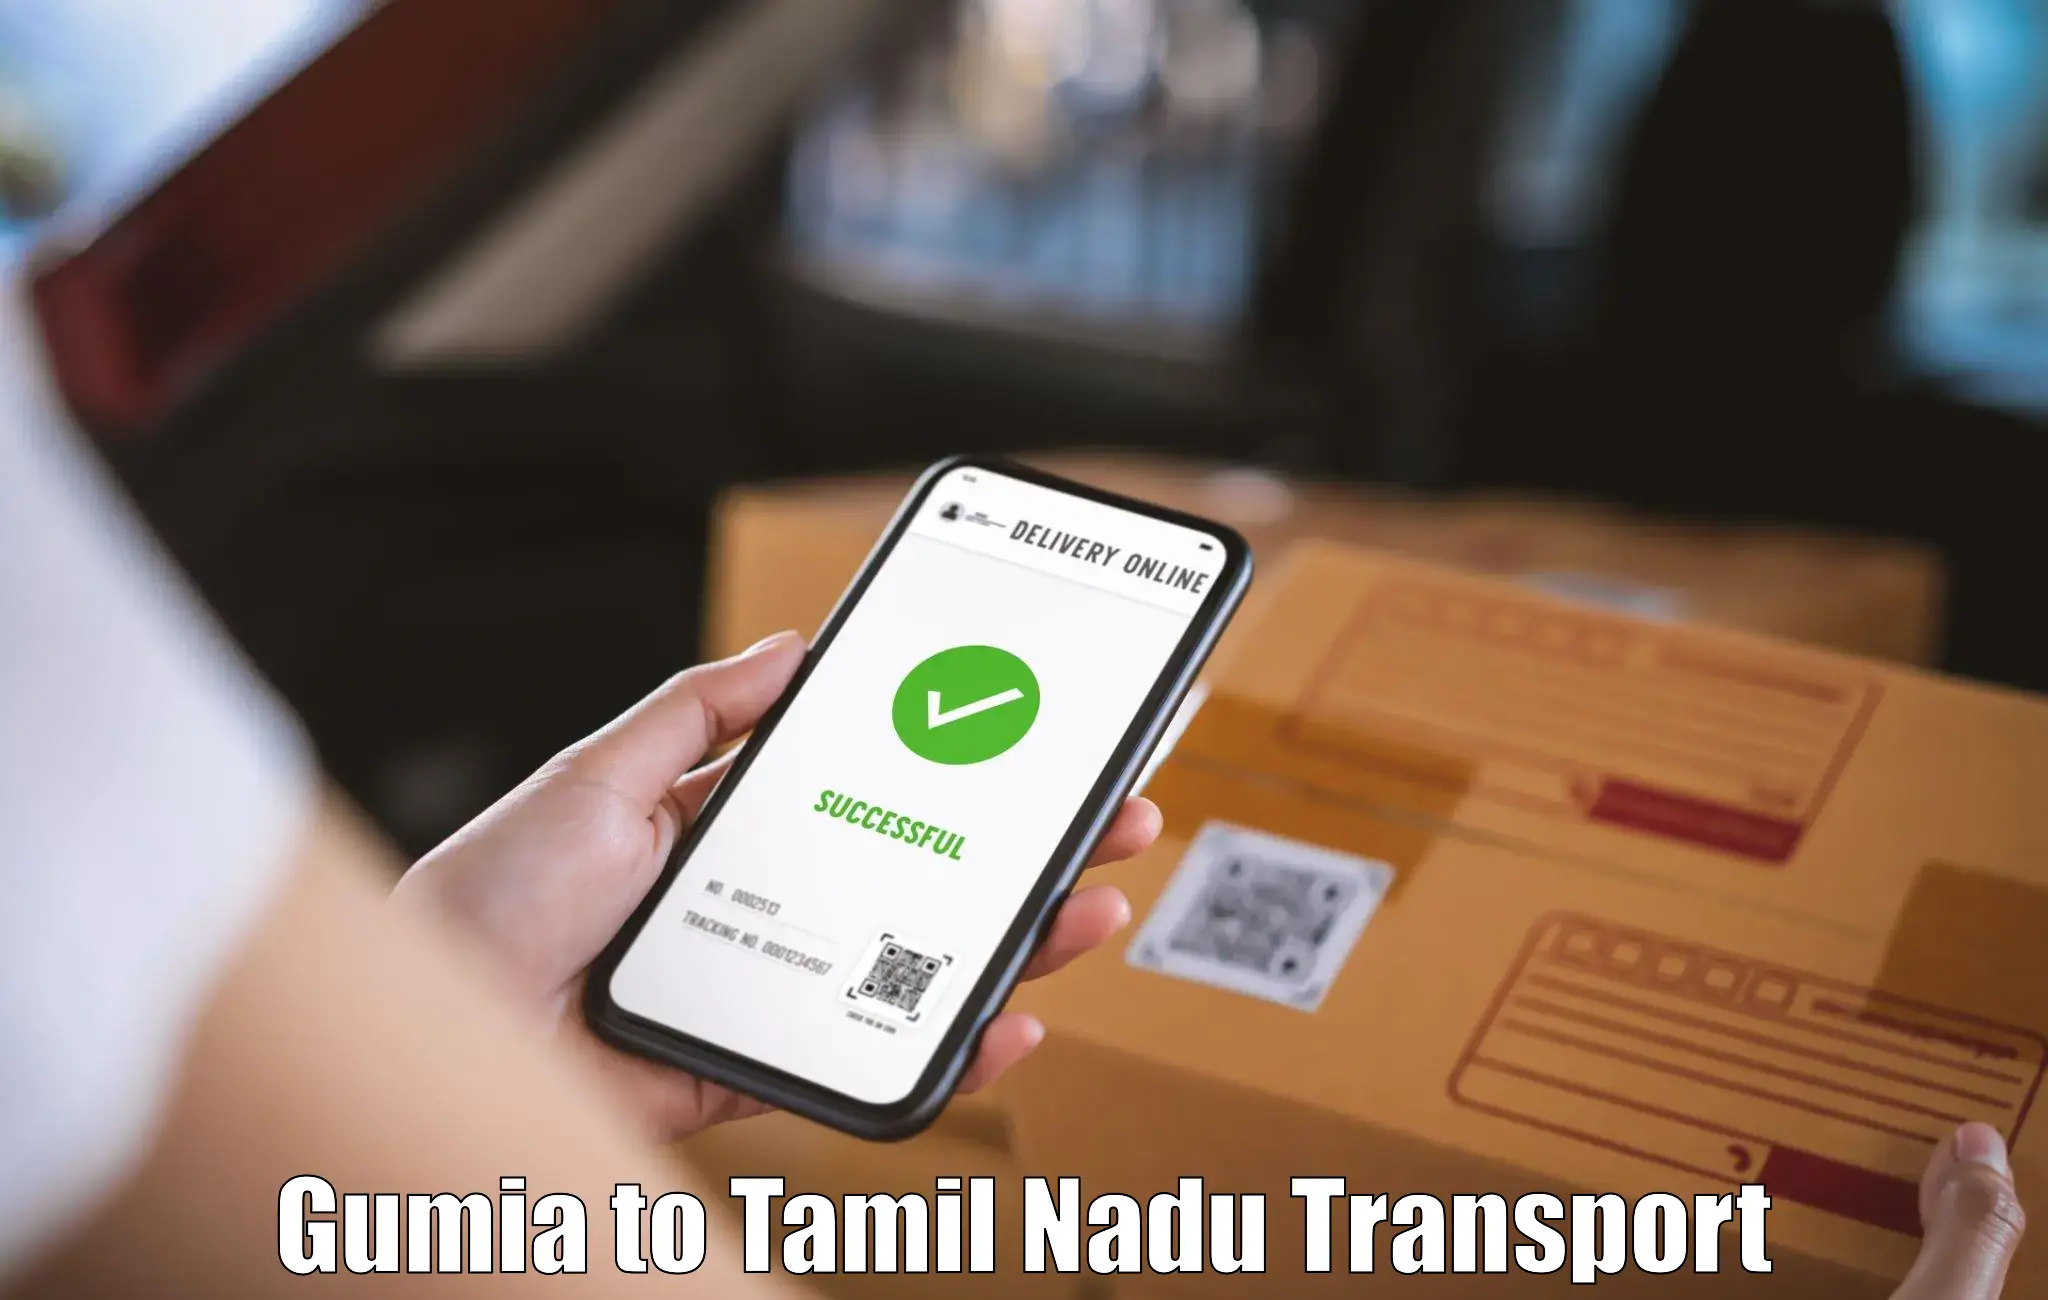 Container transport service Gumia to Tamil Nadu